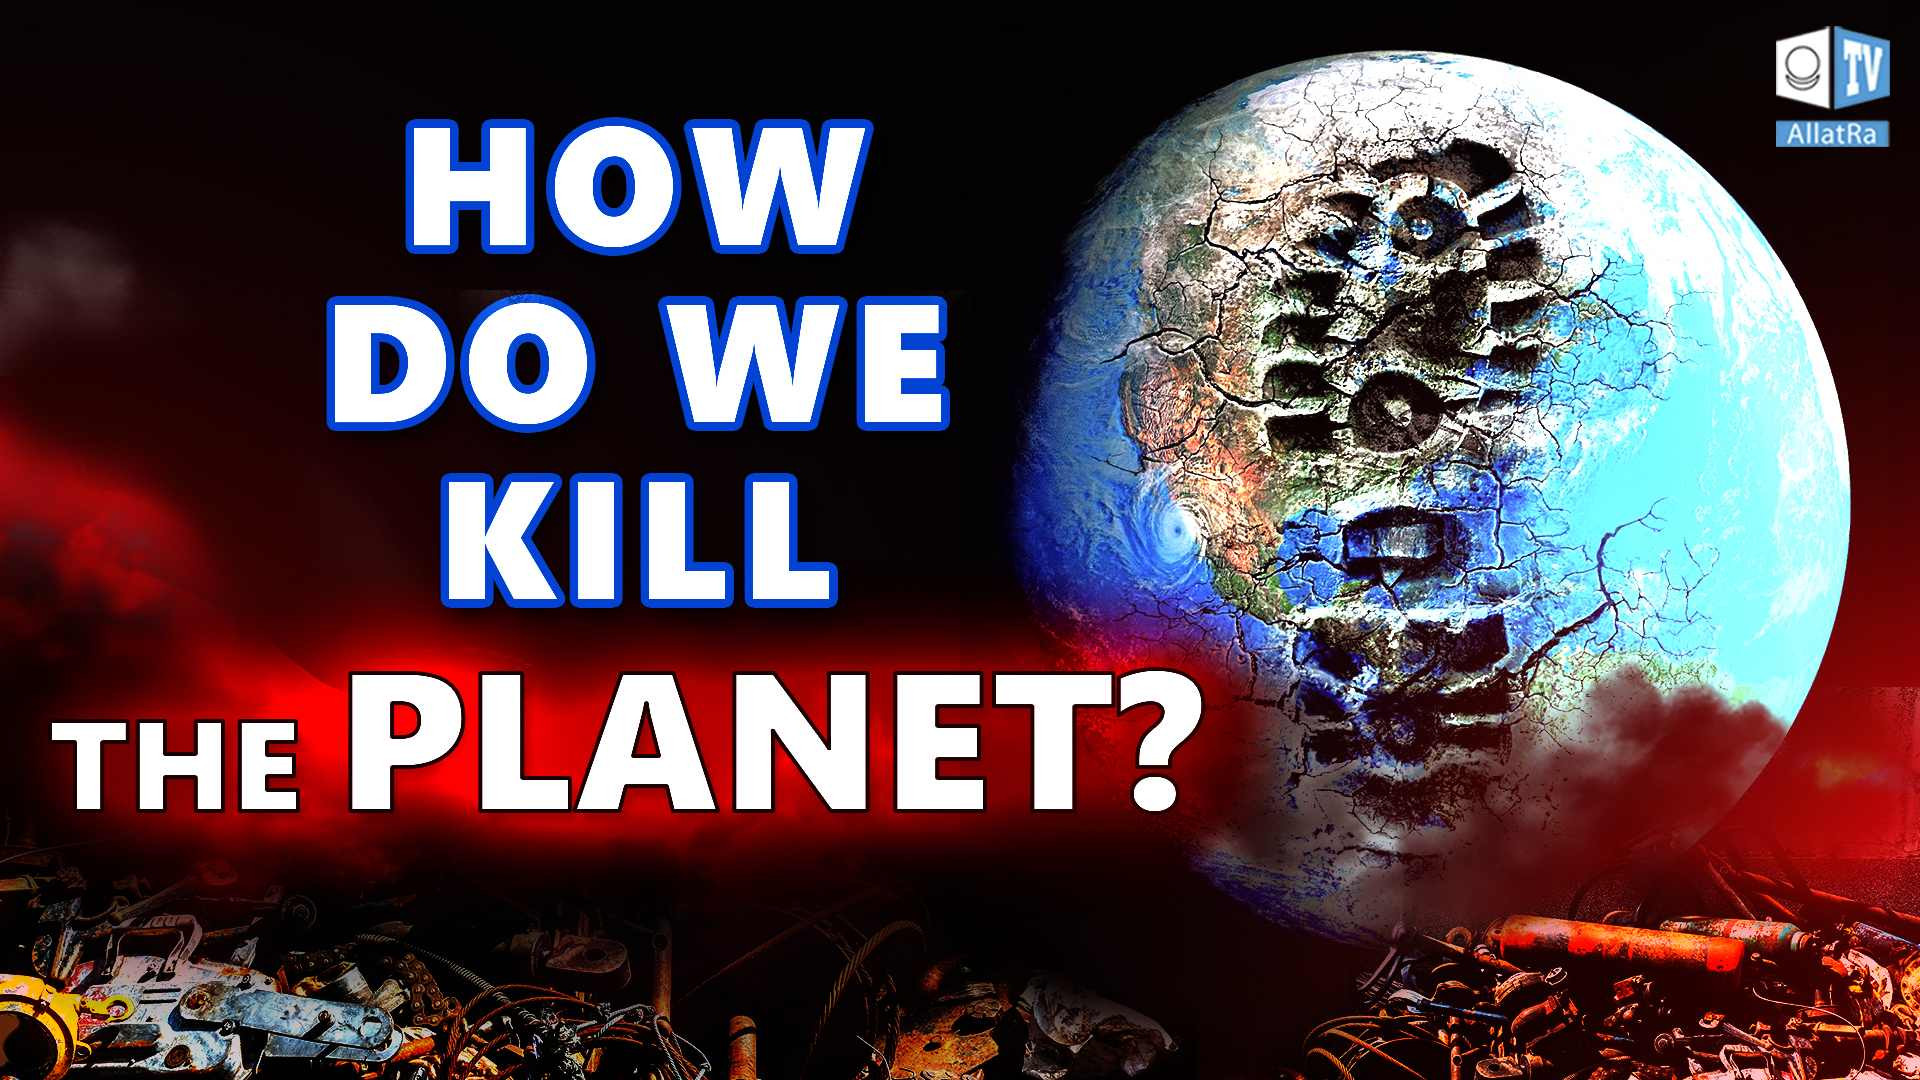 How are we killing the planet?